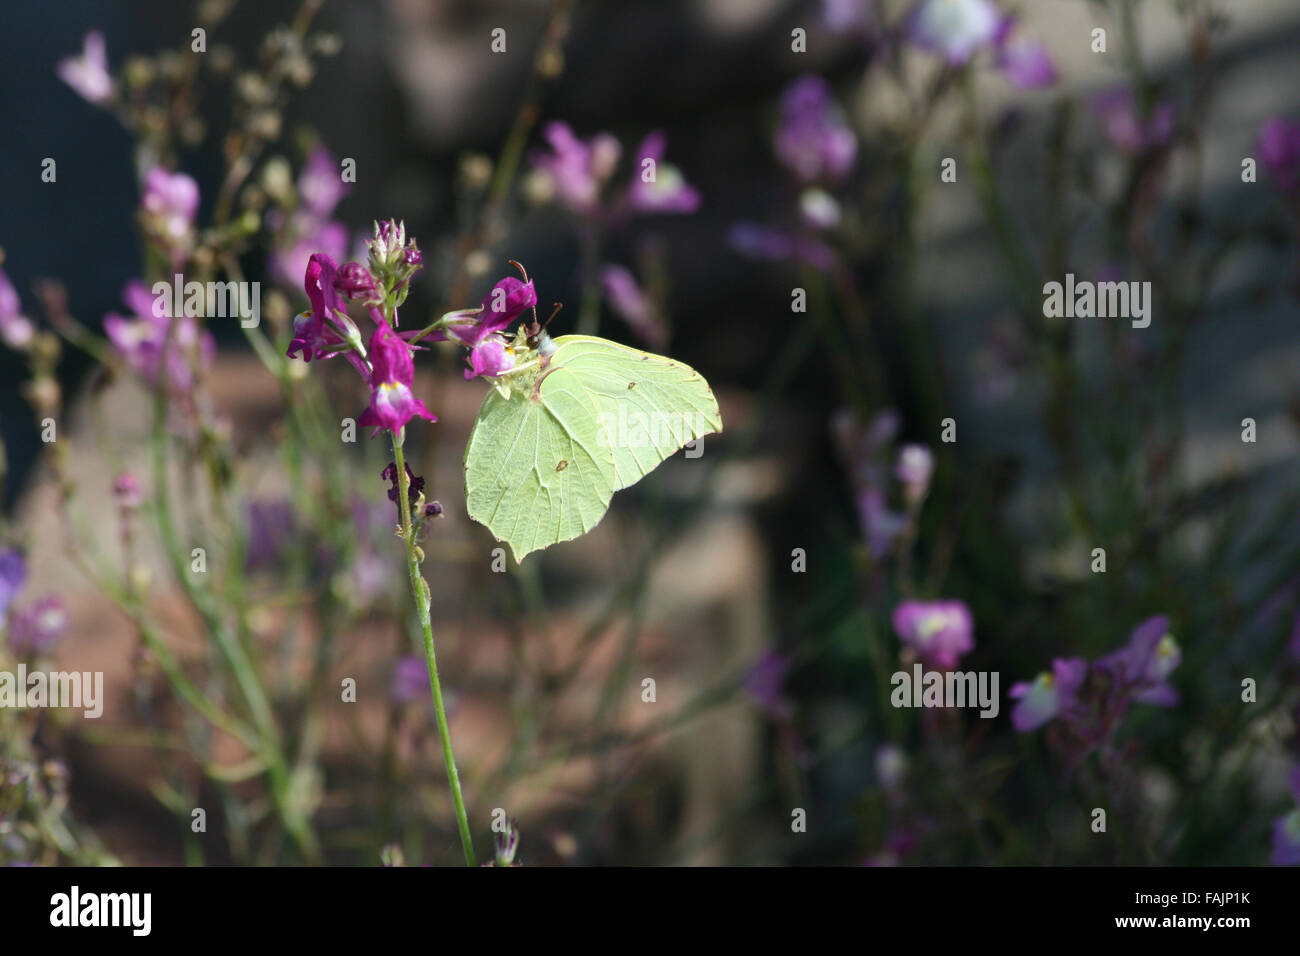 Female brimstone butterfly (Gonepteryx rhamni) feeding on linaria 'fairy bouquet' with folded wings, side view Stock Photo